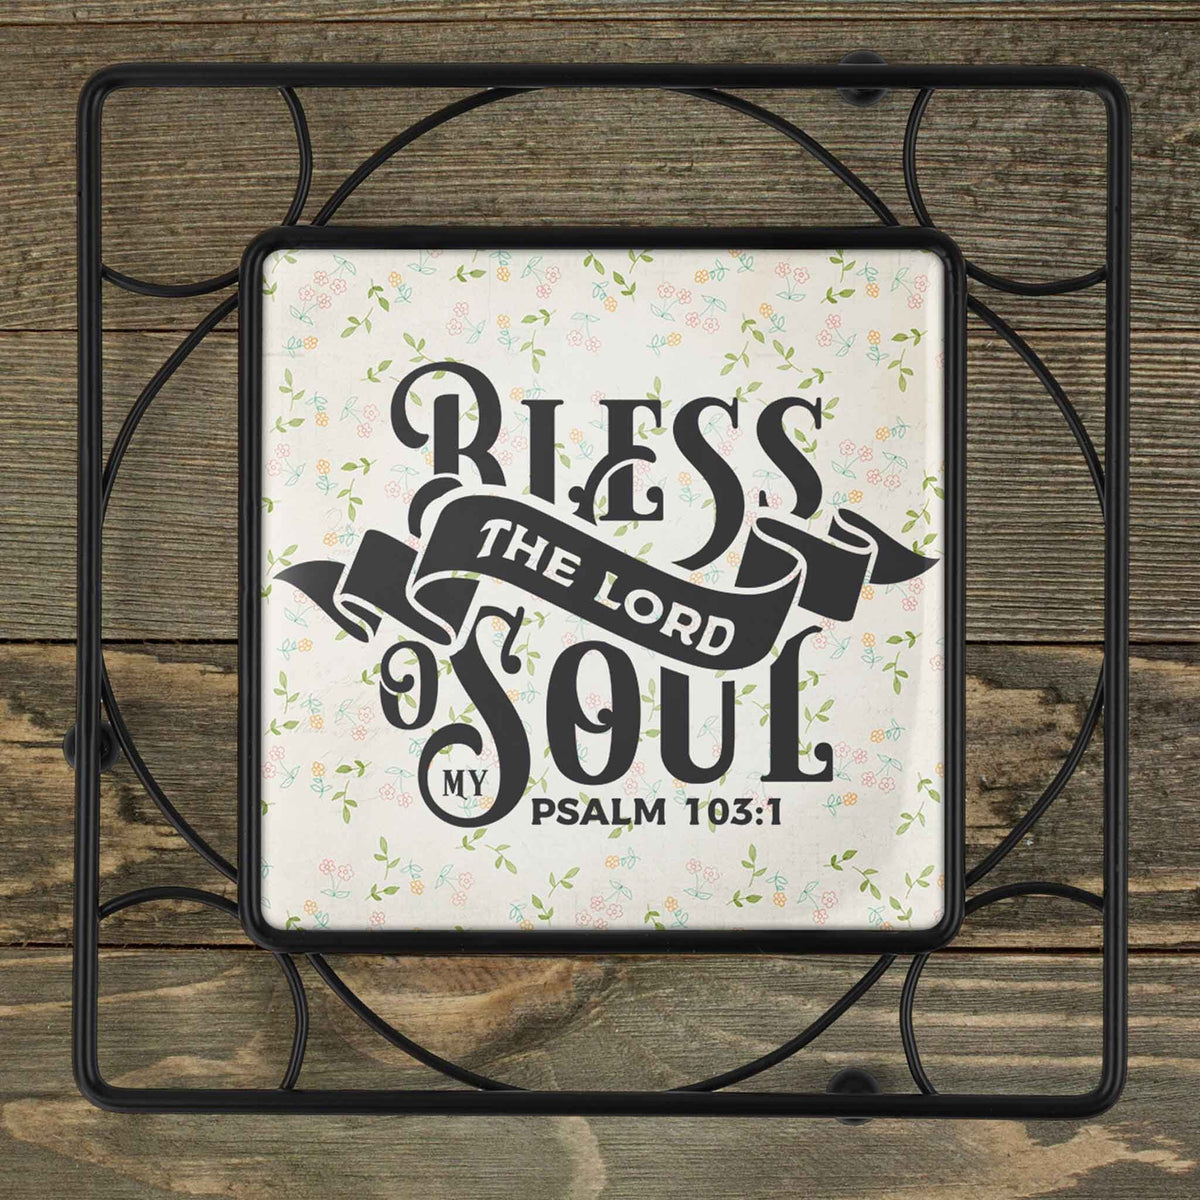 Personalized Iron Trivet | Custom Kitchen Gifts | Bless the Lord